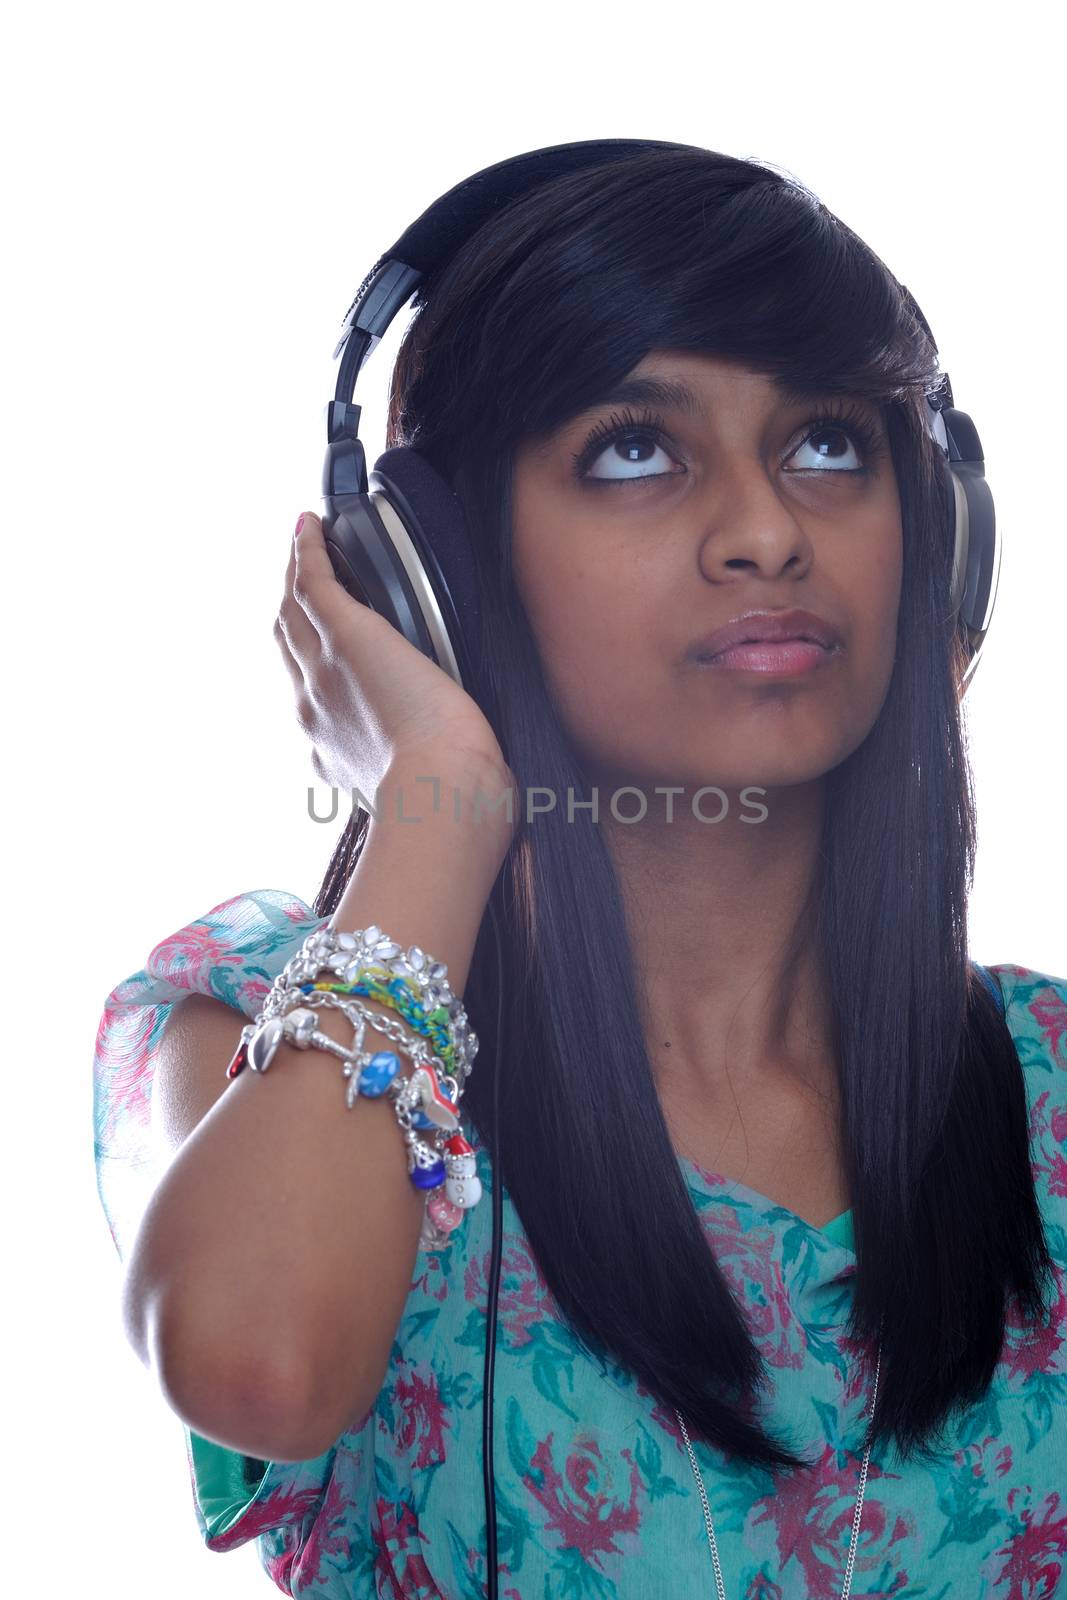 Teen girl from India with headphones